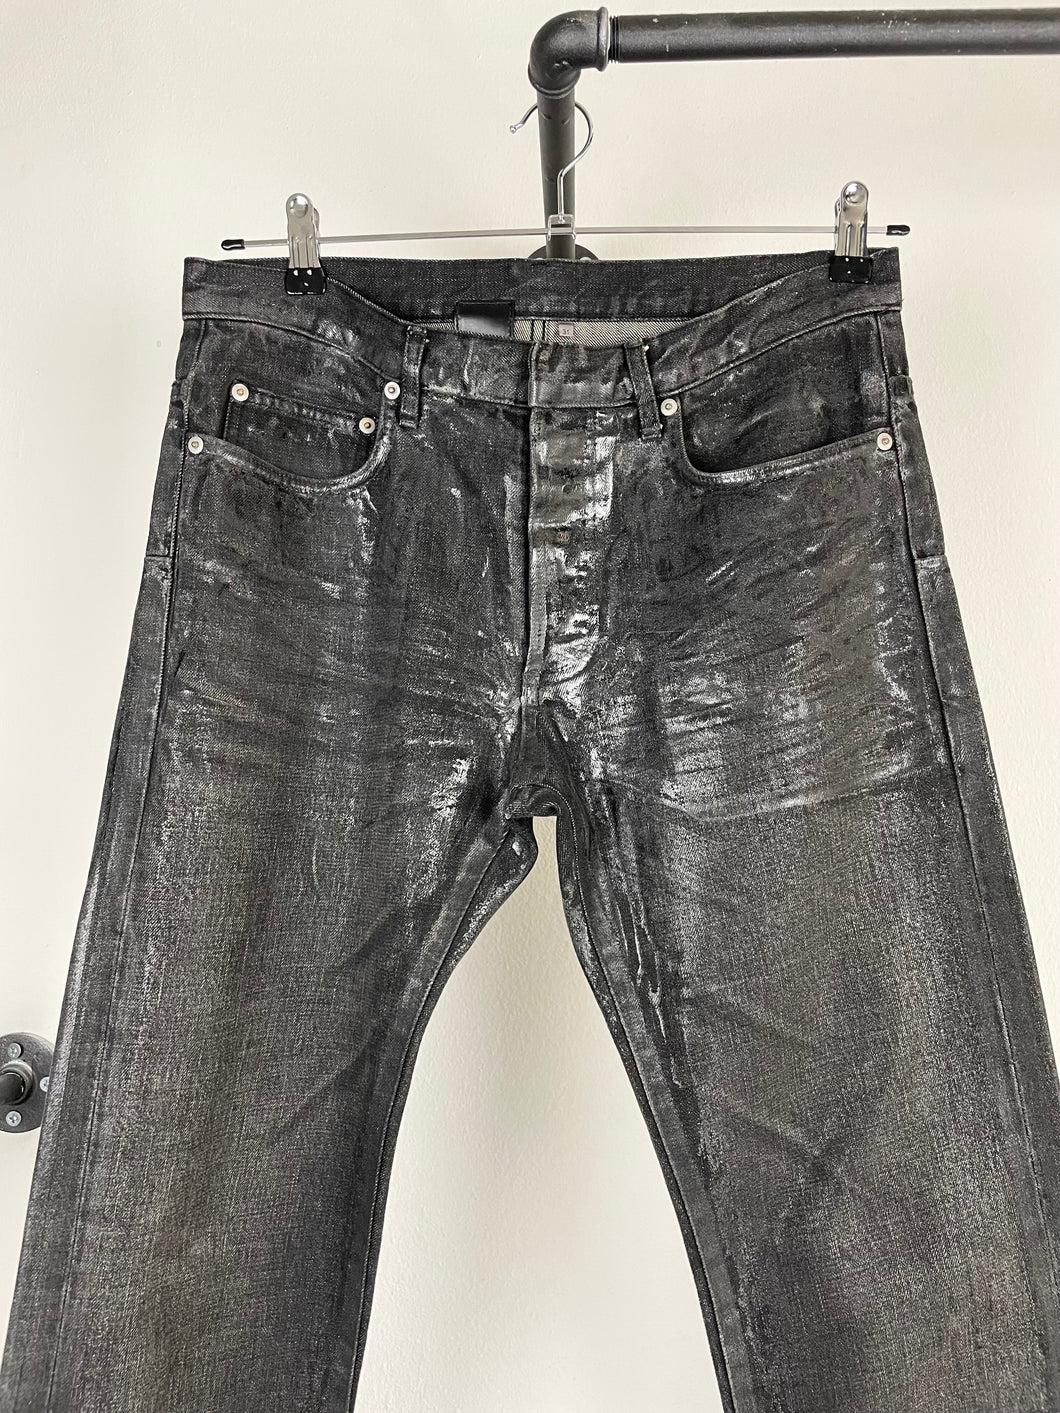 AW2003 Dior by Hedi Slimane waxed jeans